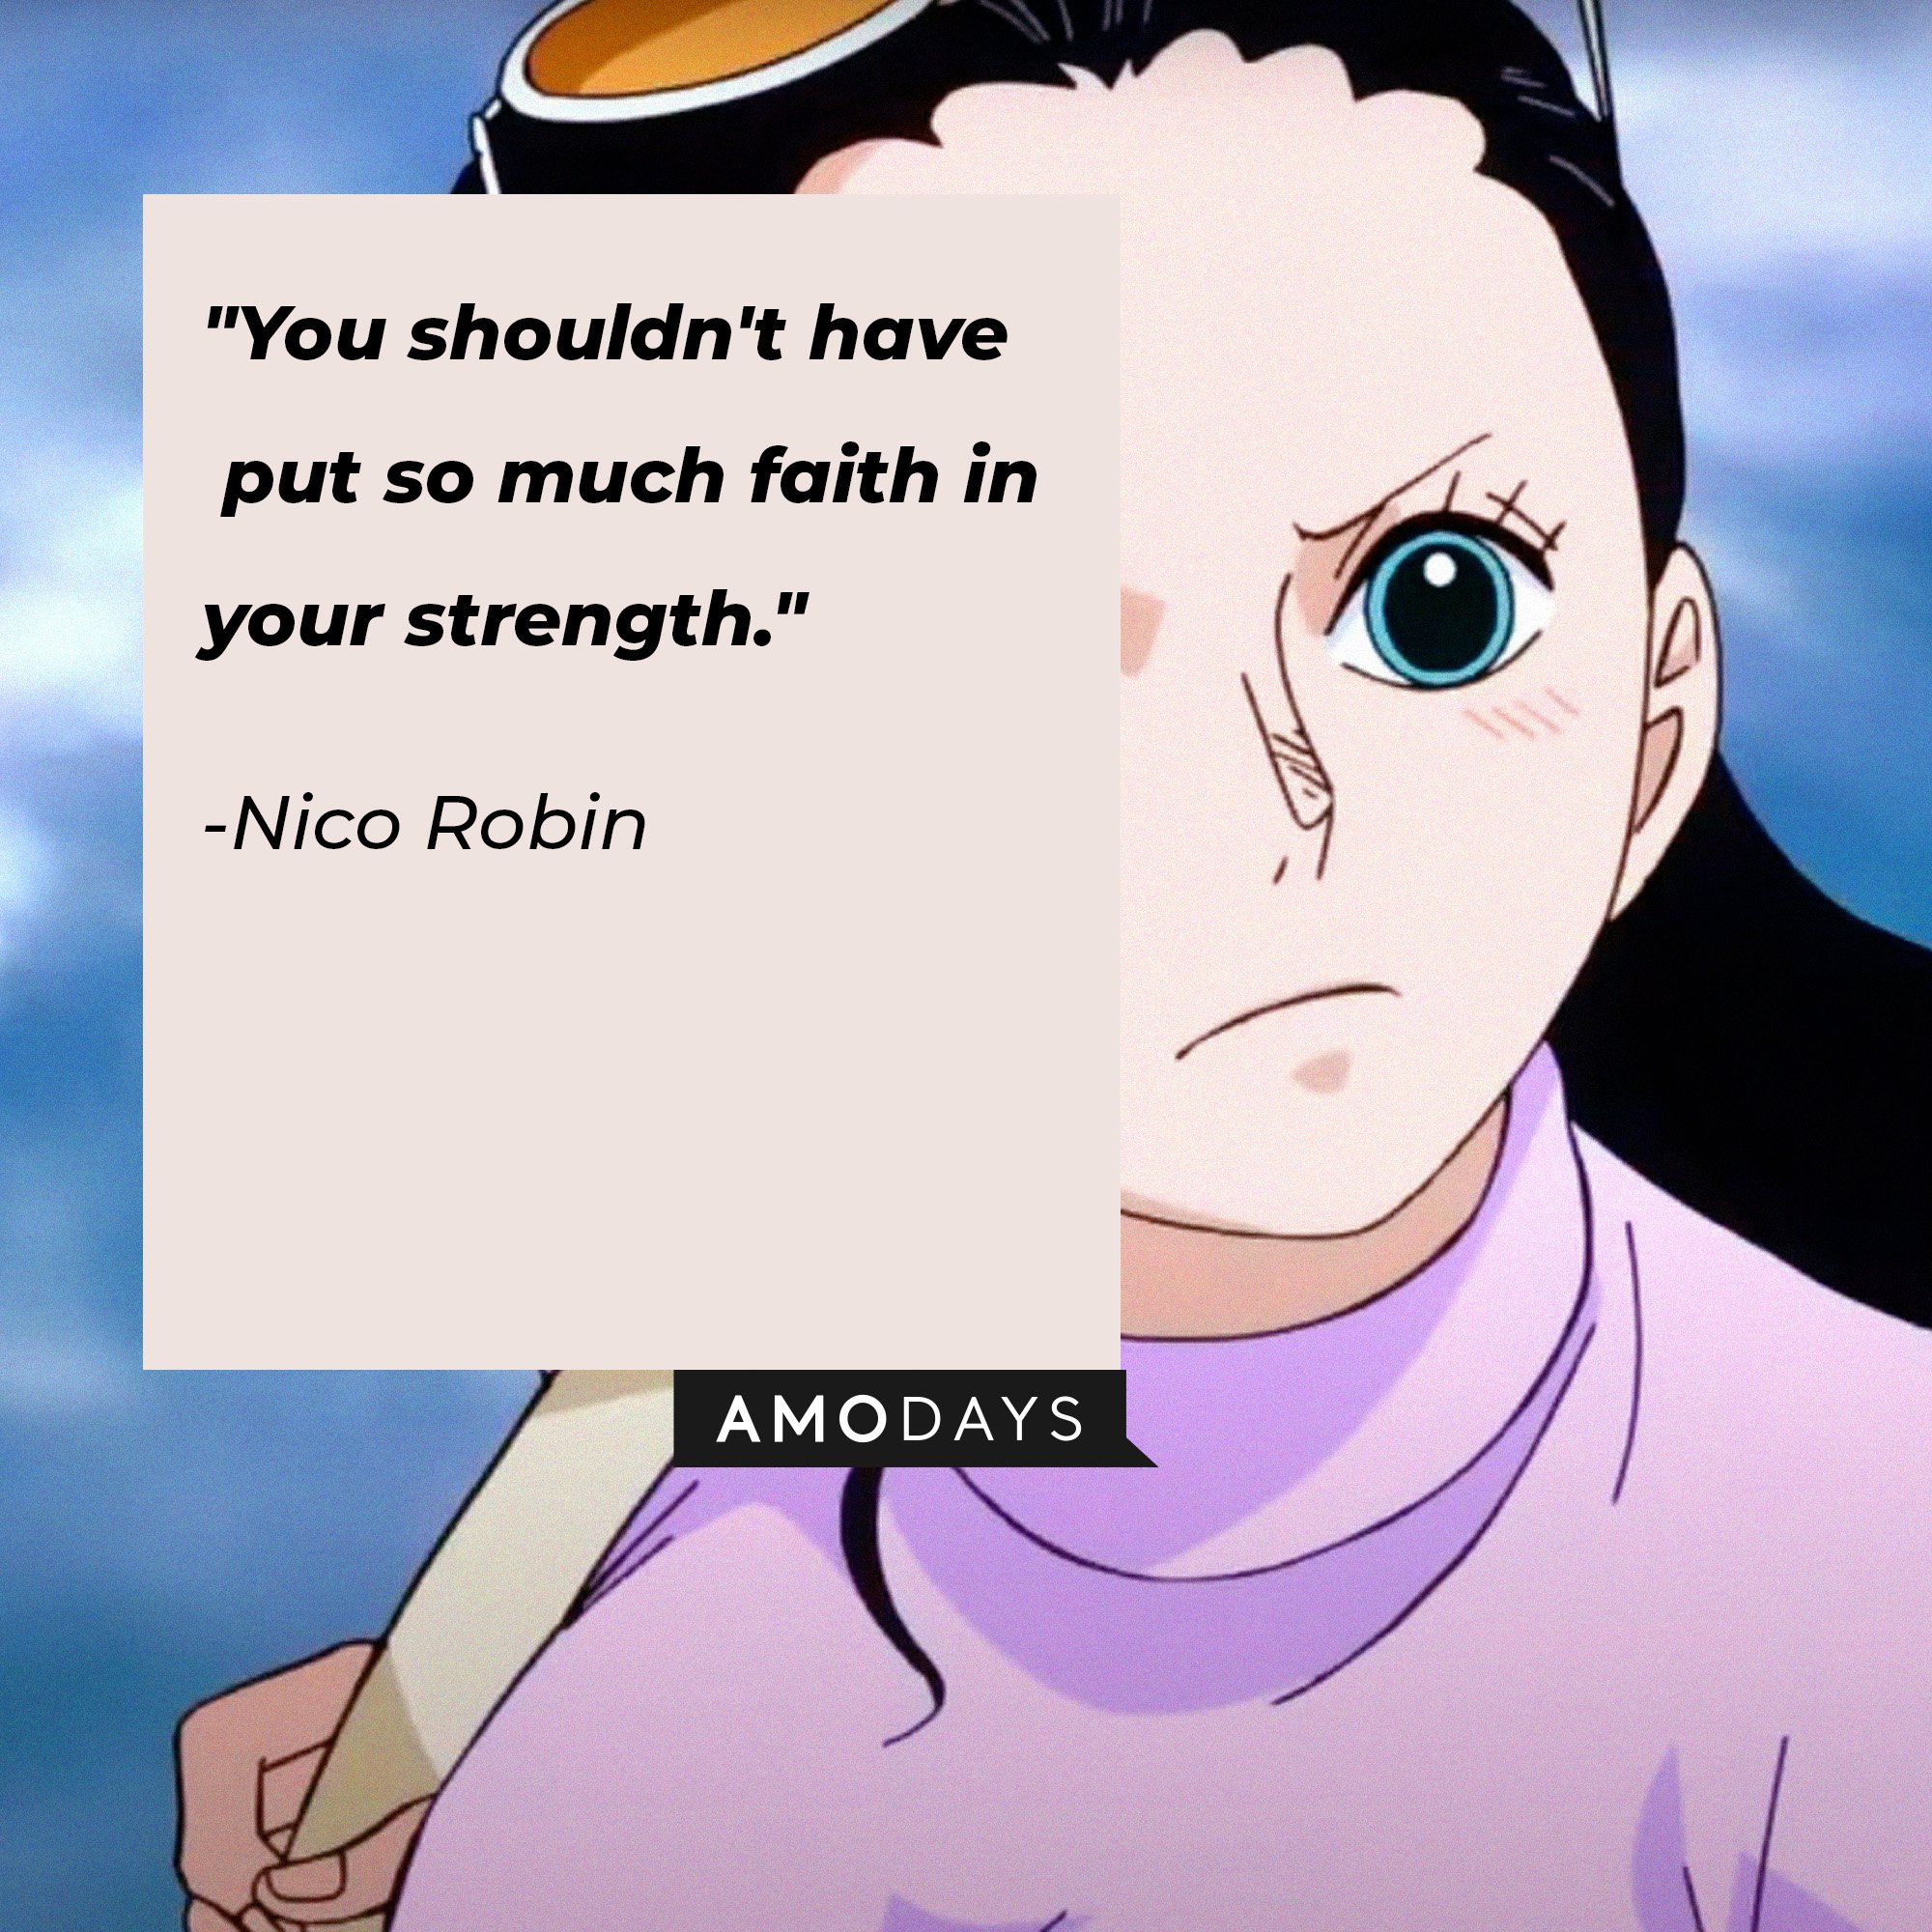 Nico Robin’s quote: "You shouldn't have put so much faith in your strength."  | Image: AmoDays